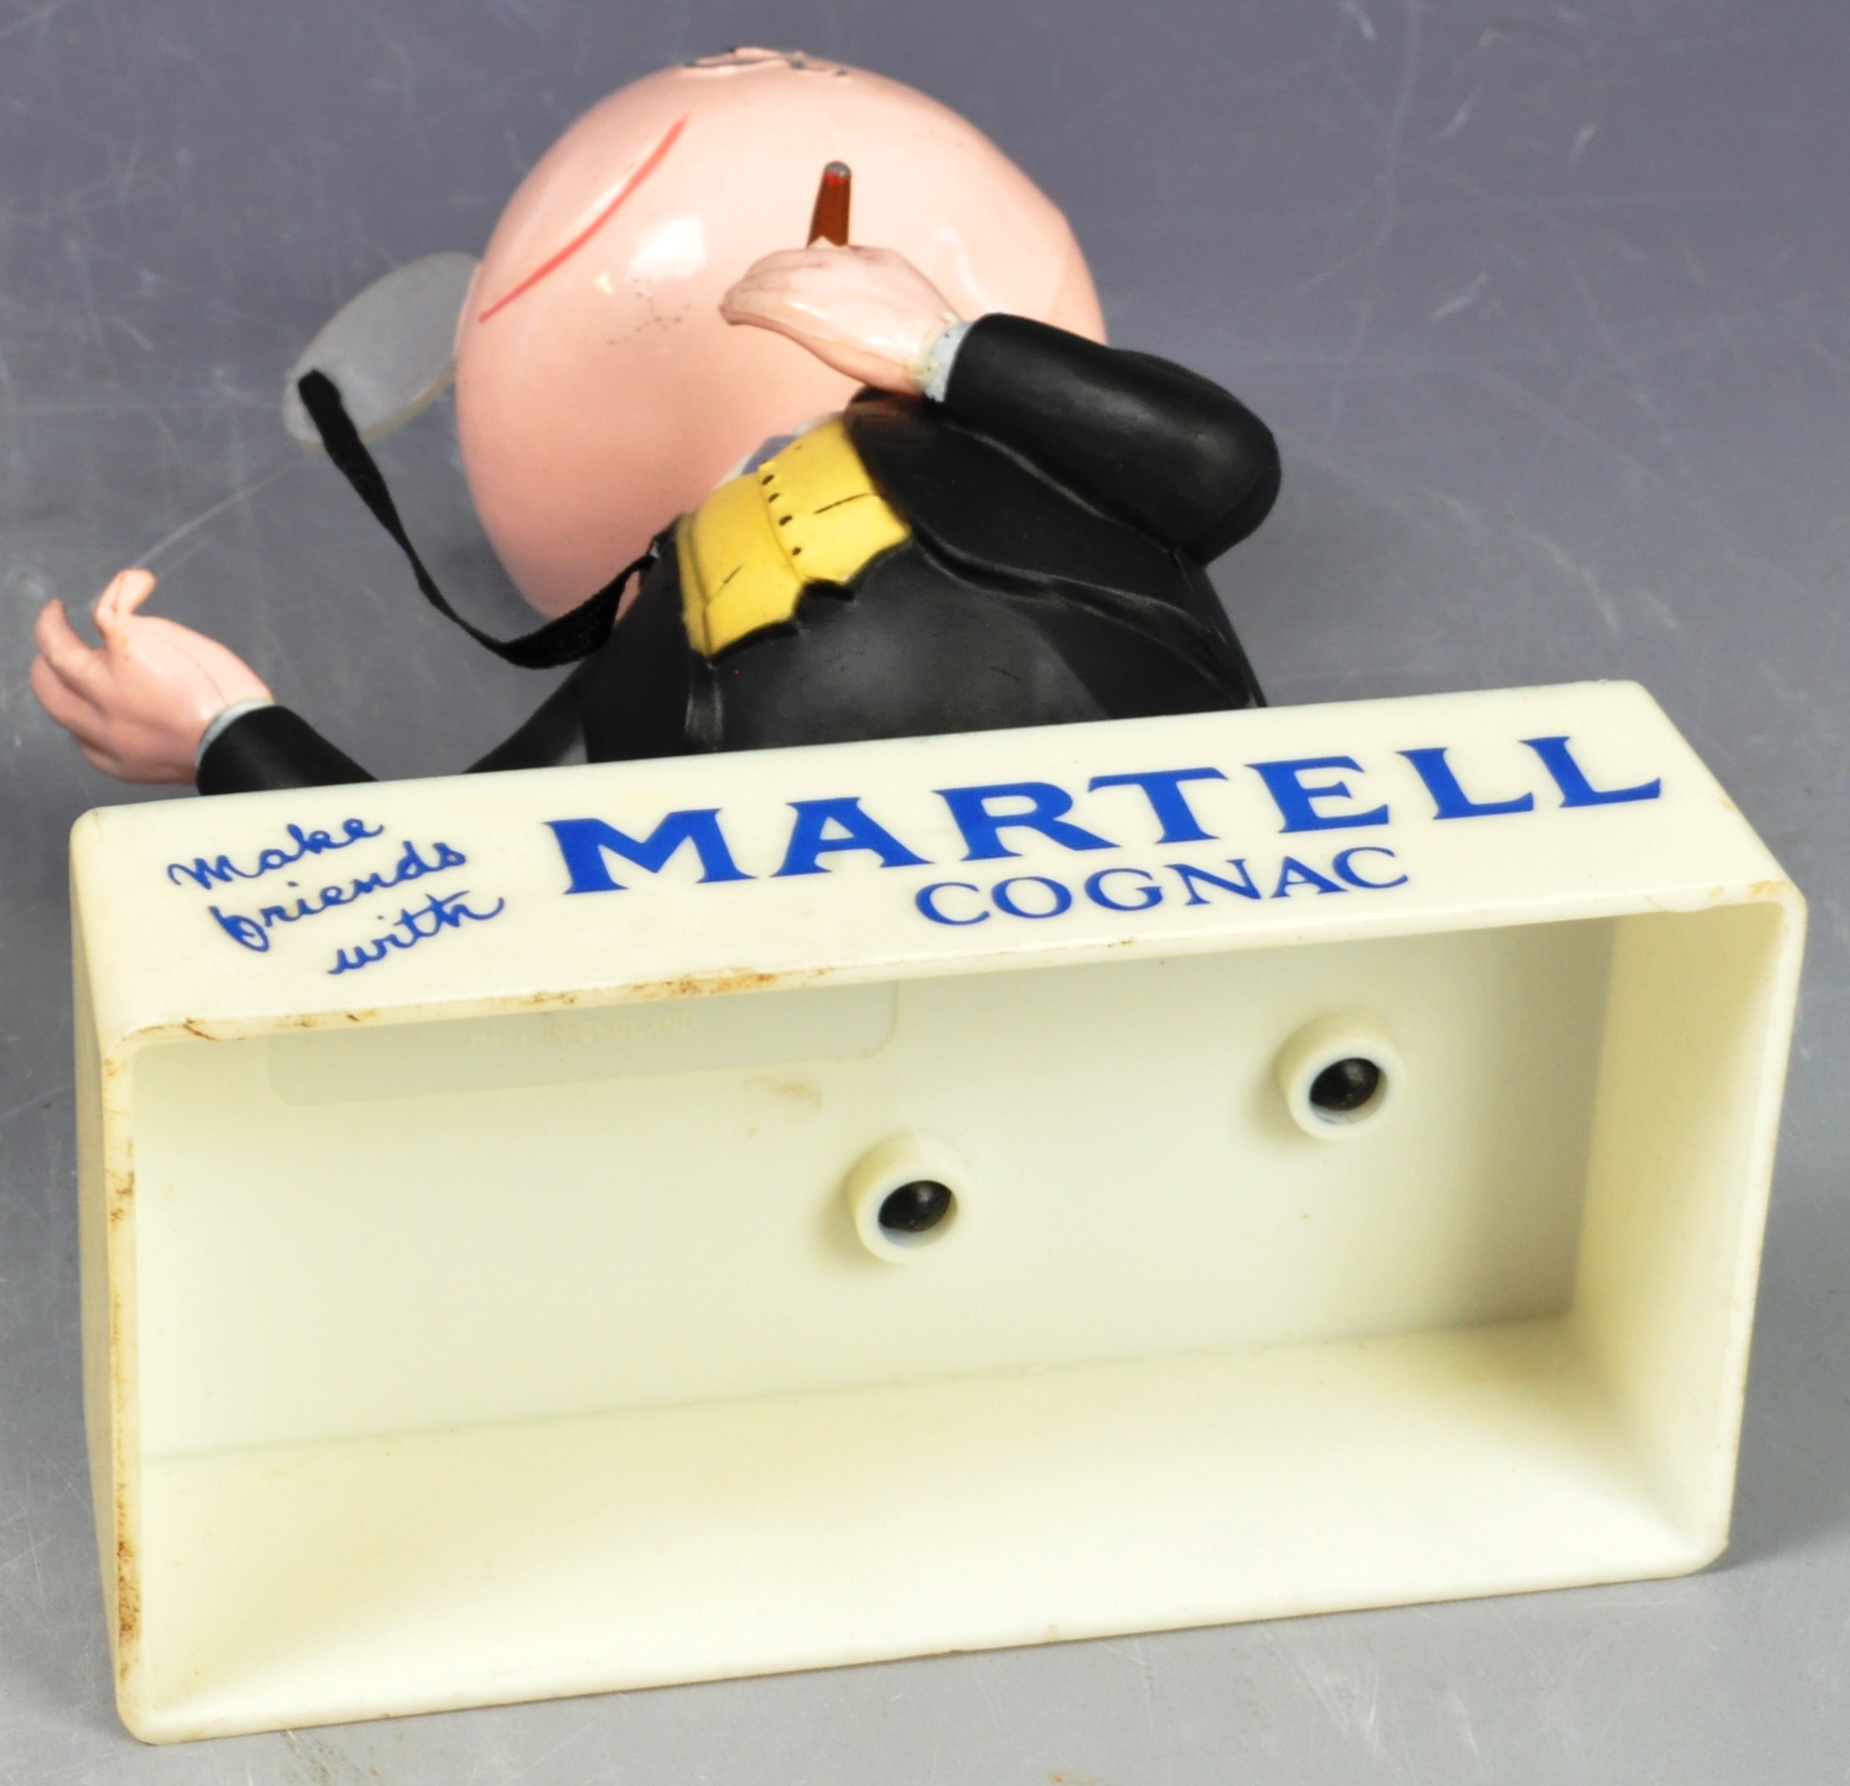 COLLECTION OF MARTELL COGNAC ADVERTISING FIGURES - Image 14 of 16